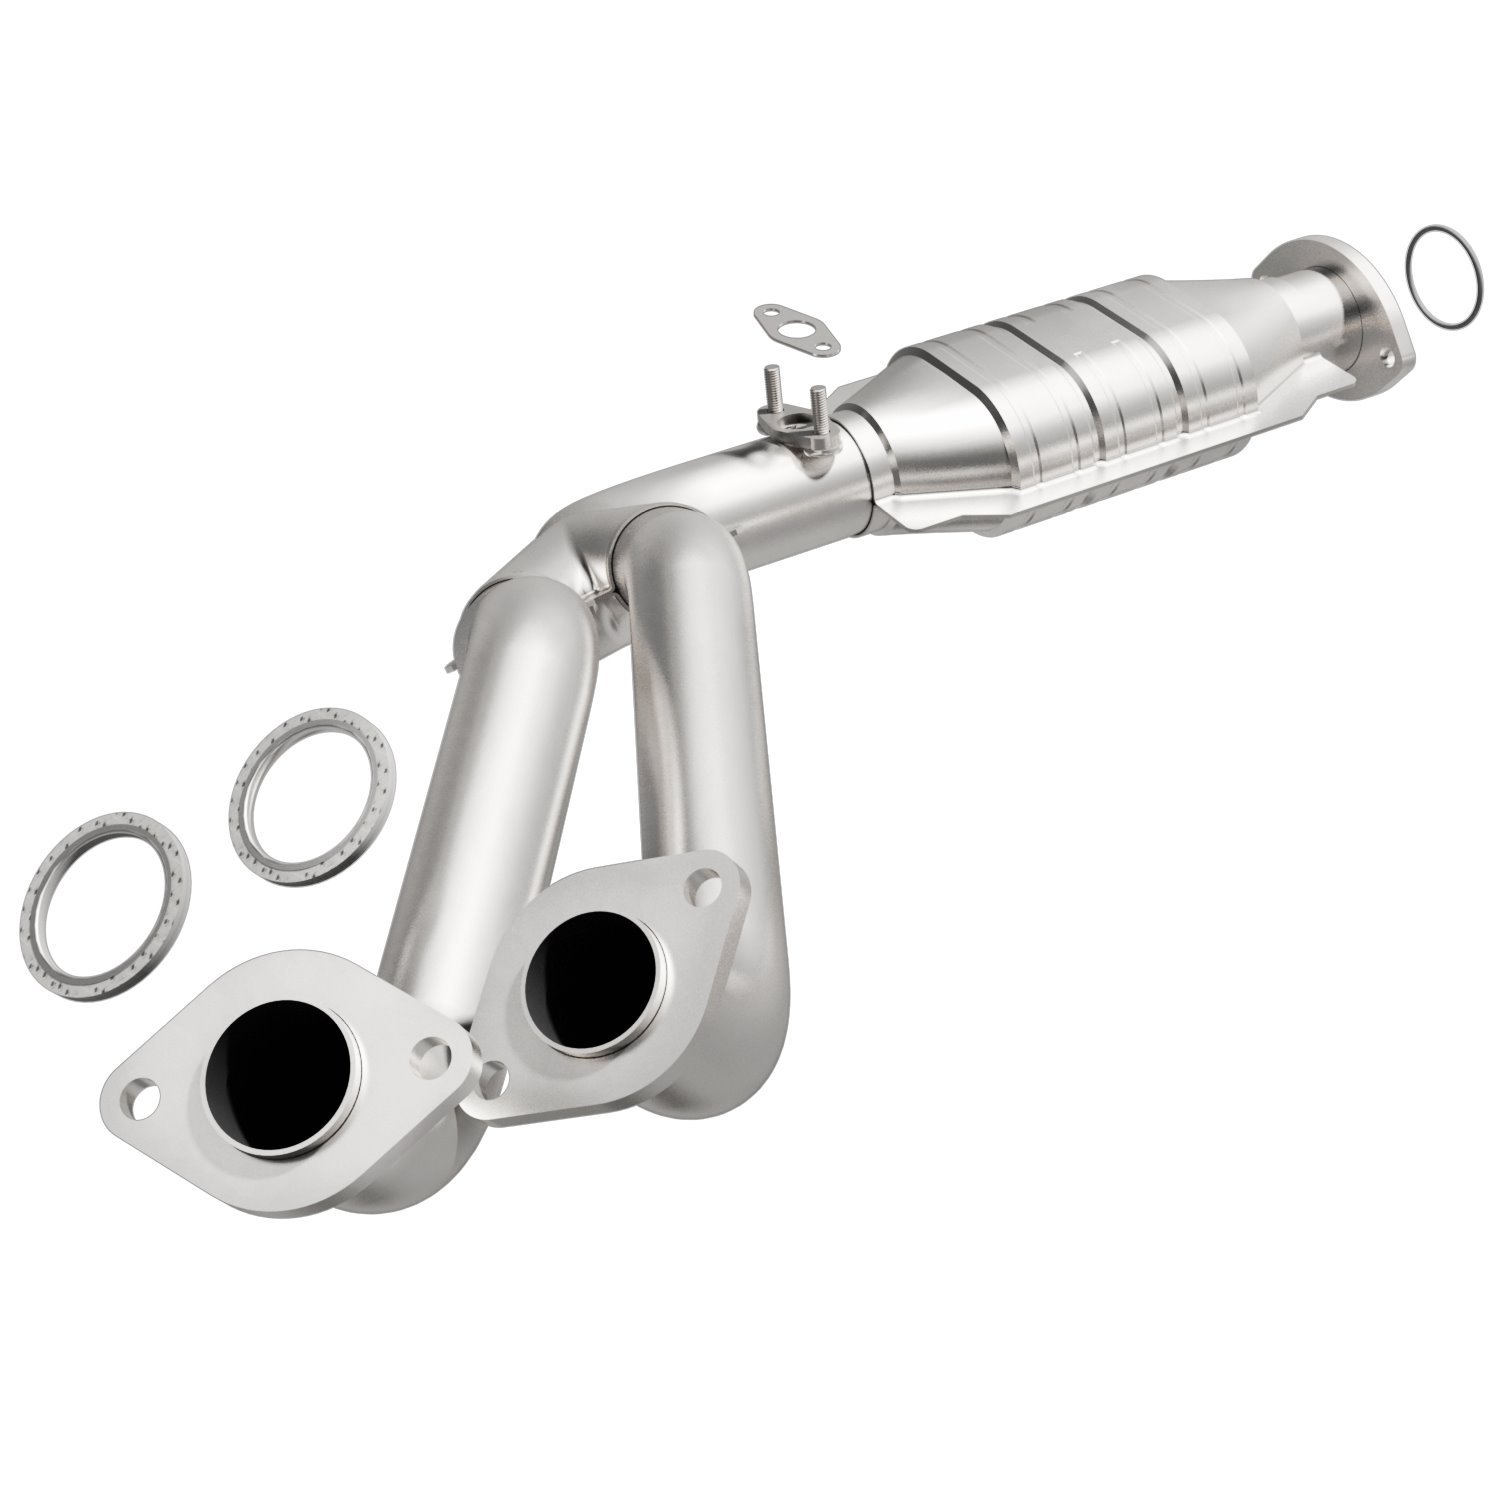 Direct-Fit Catalytic Converter 1995-97 Toyota Land Cruiser 4.5L